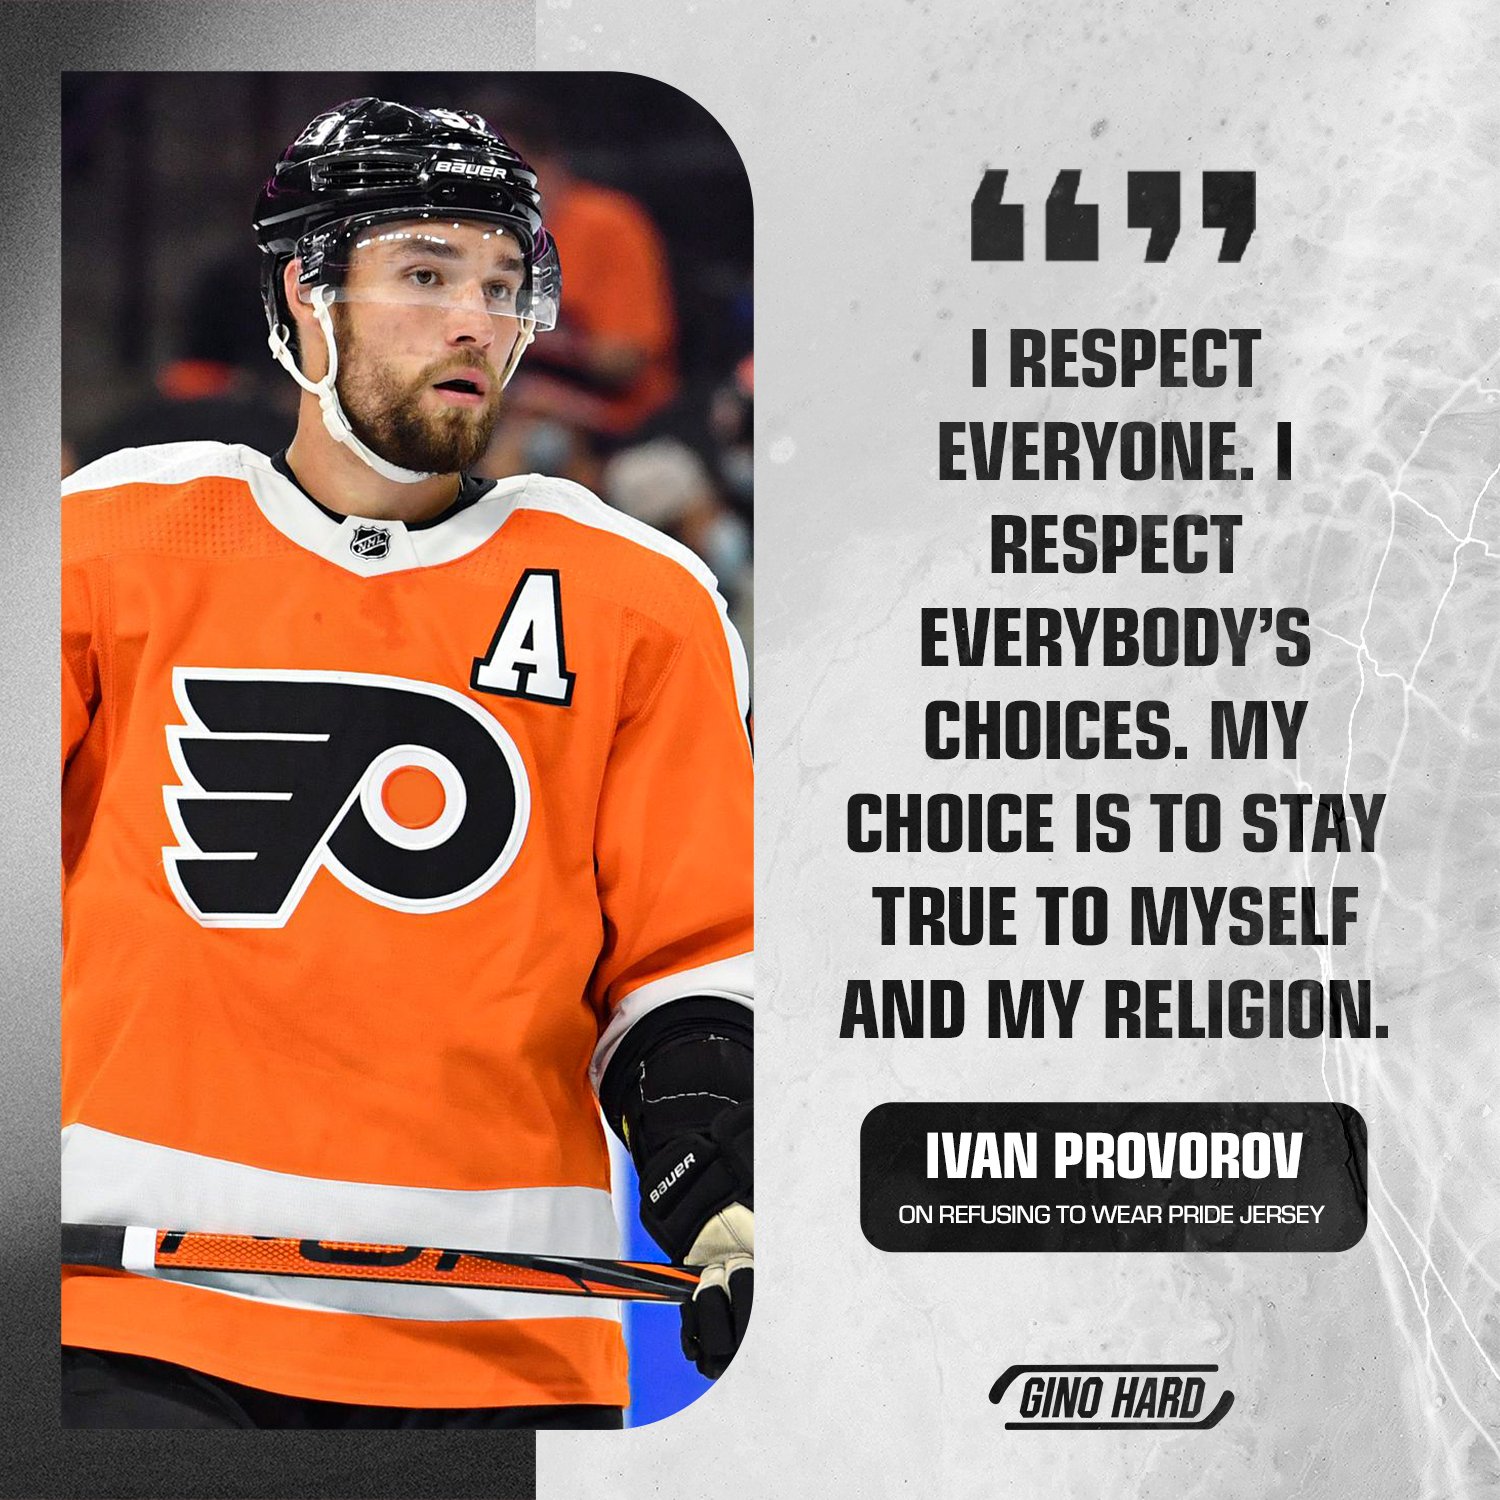 Gino Hard on X: Ivan Provorov comments on why he refused to wear